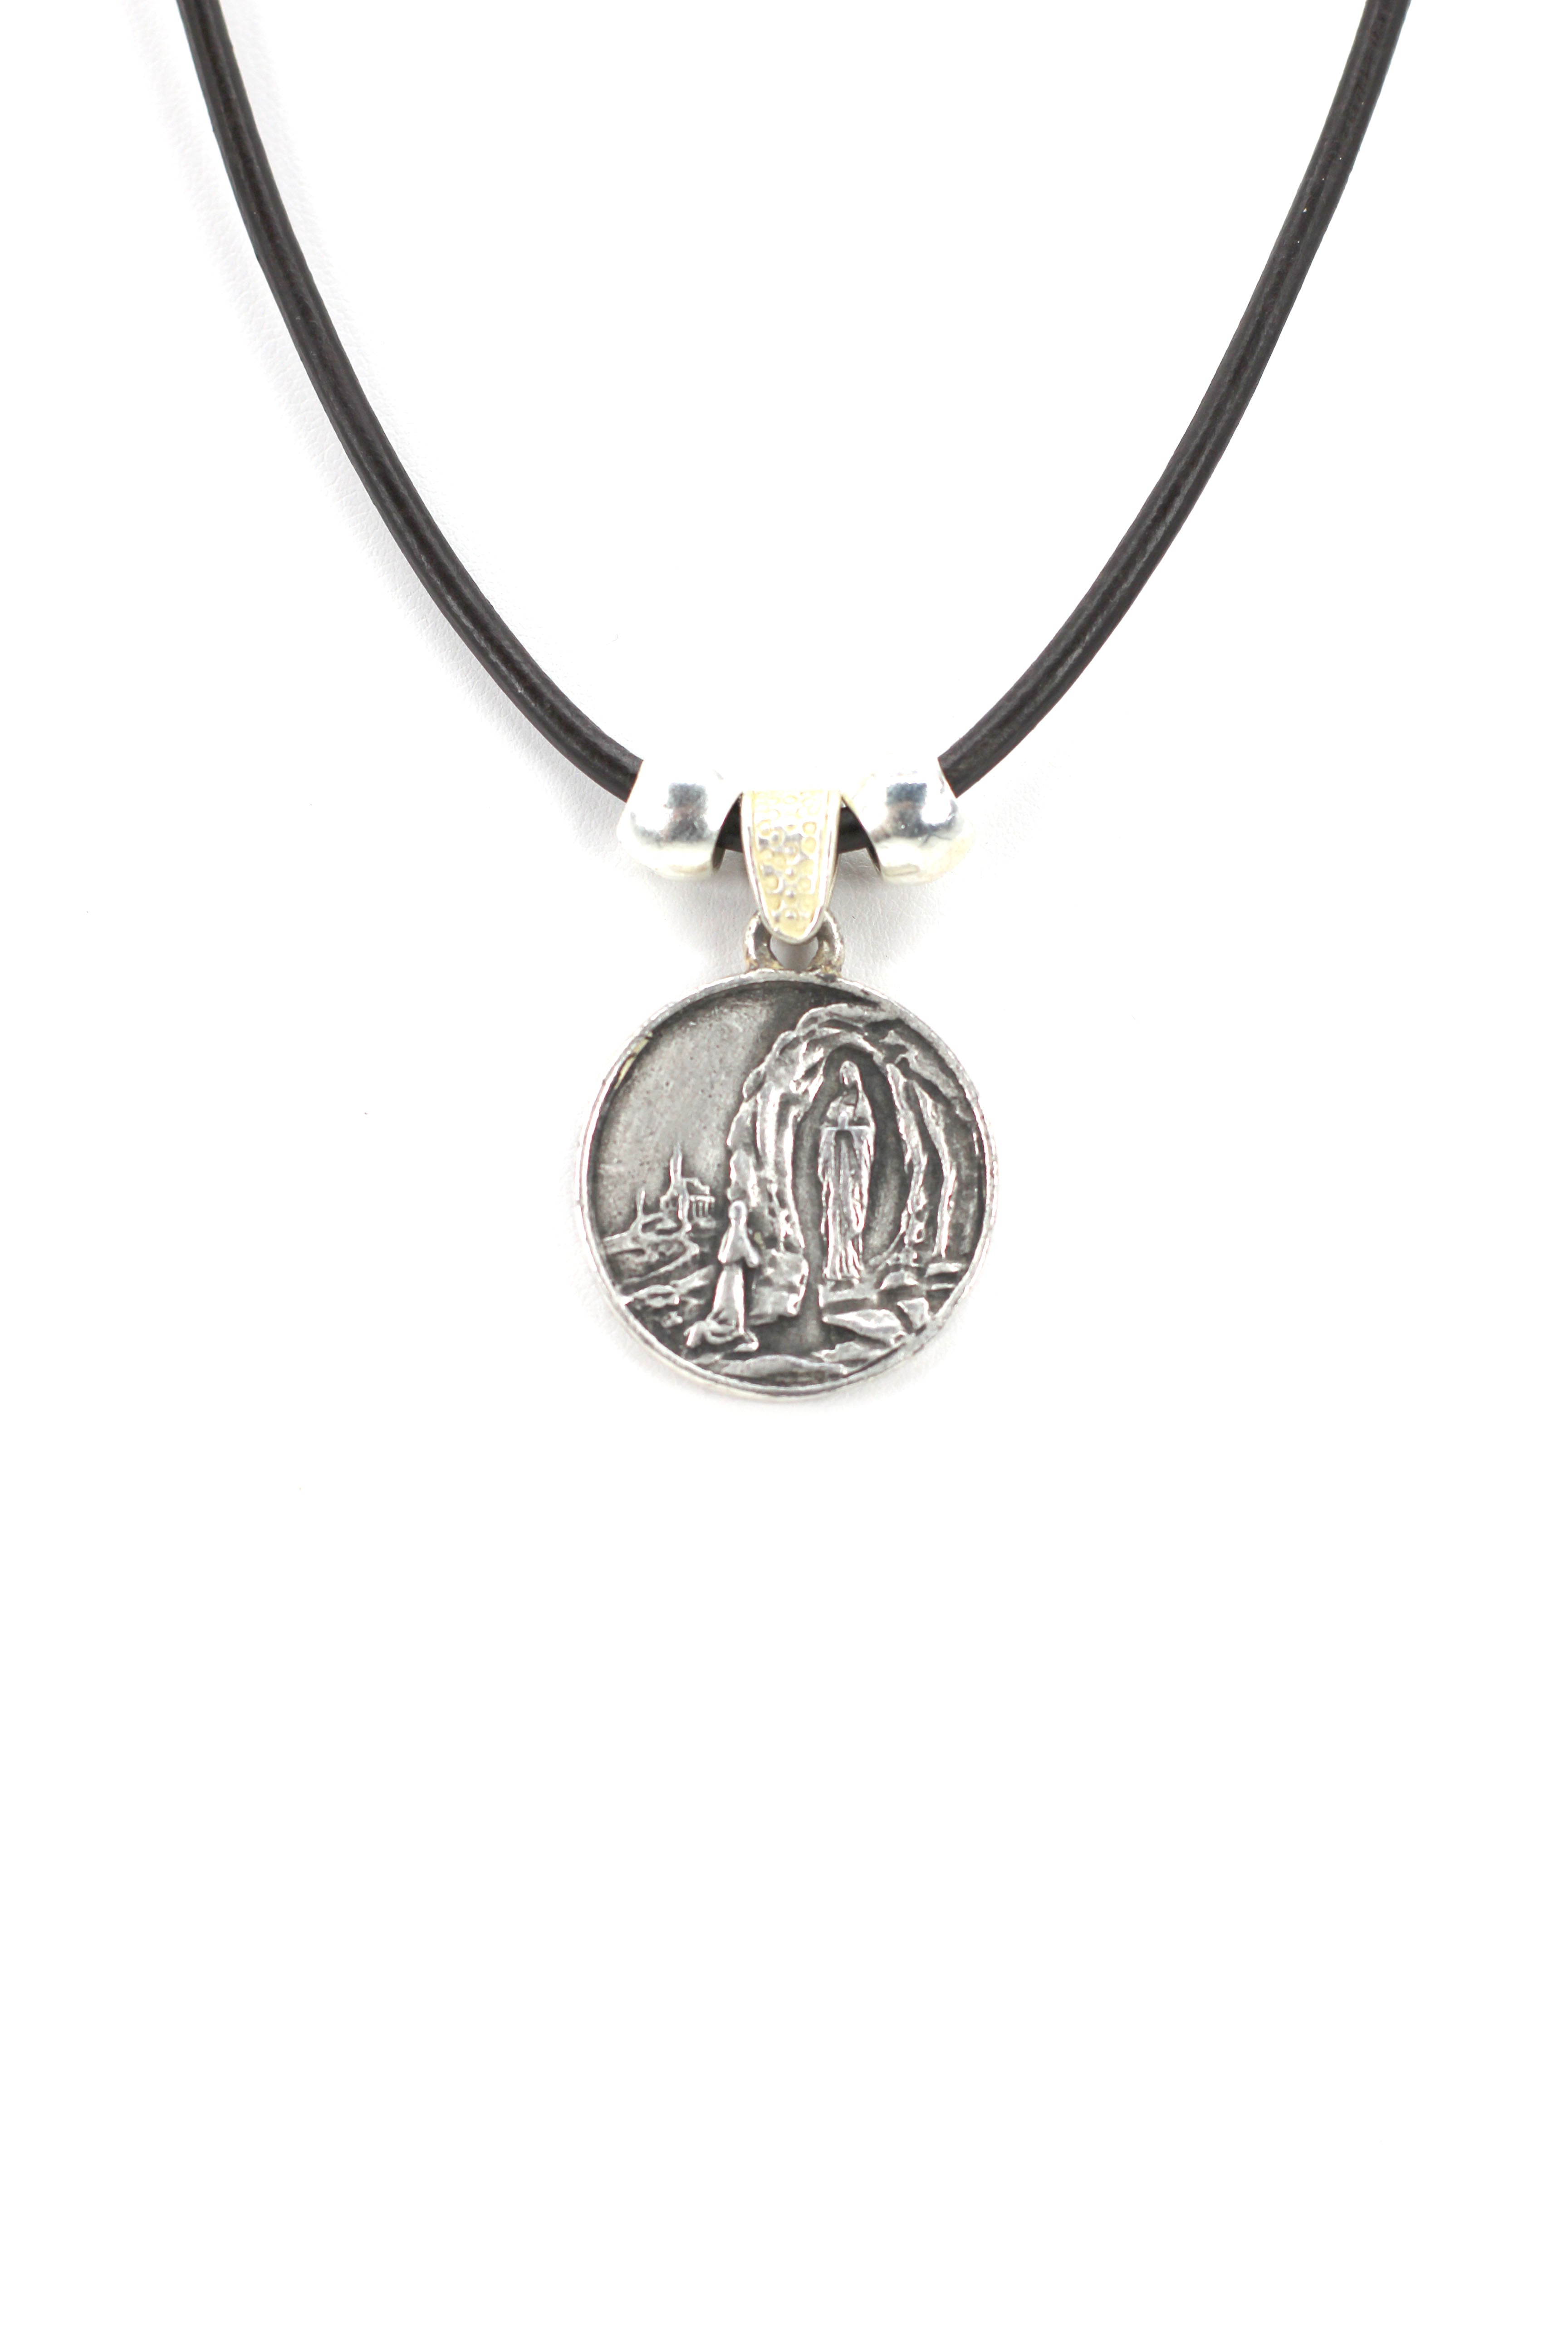 Vintage Necklace of Our Lady Of Lourdes Jewelry with Genuine Leather strap by Graciela's Collection